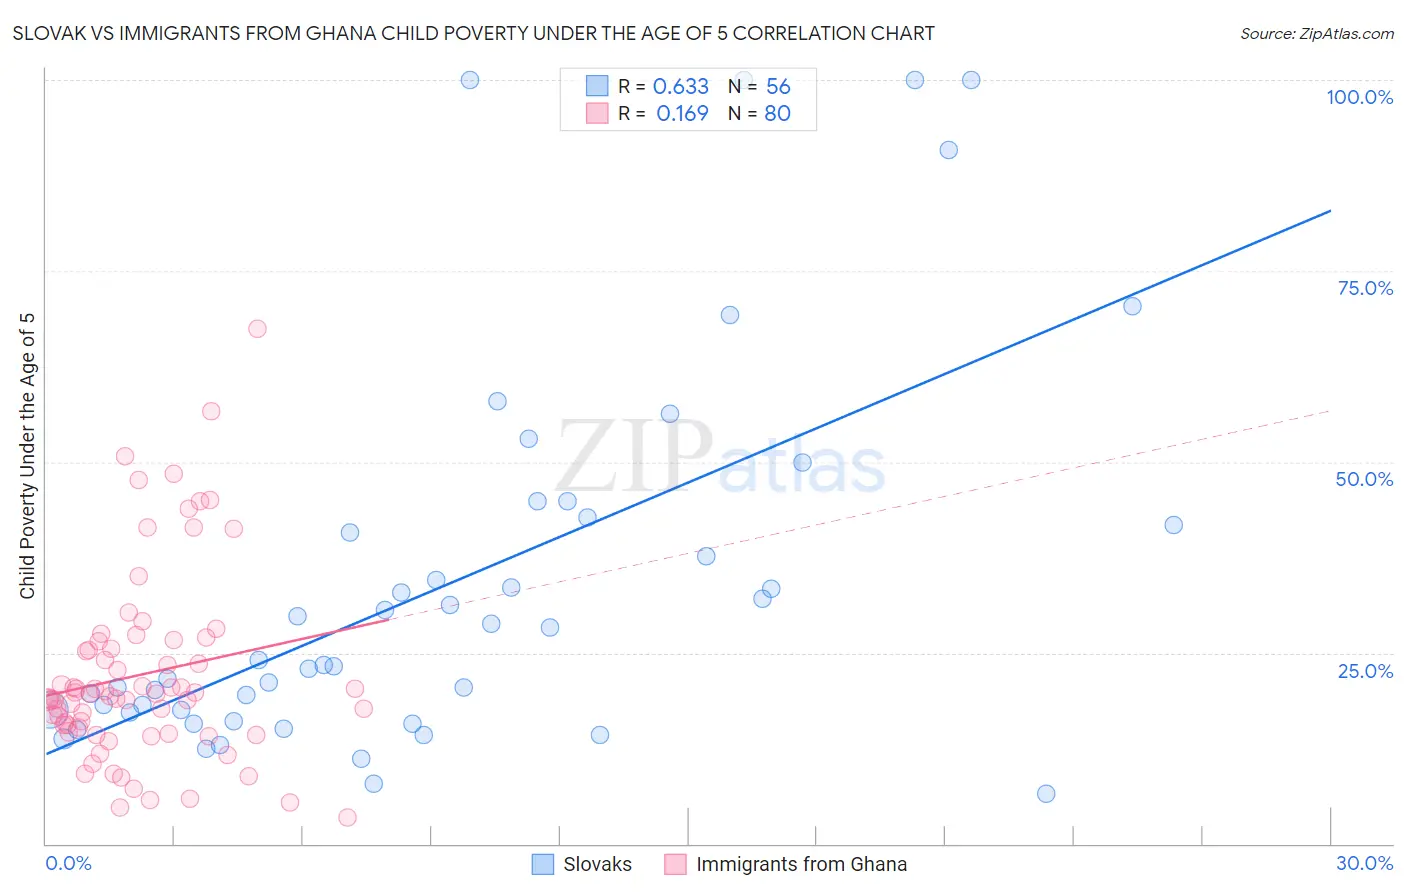 Slovak vs Immigrants from Ghana Child Poverty Under the Age of 5